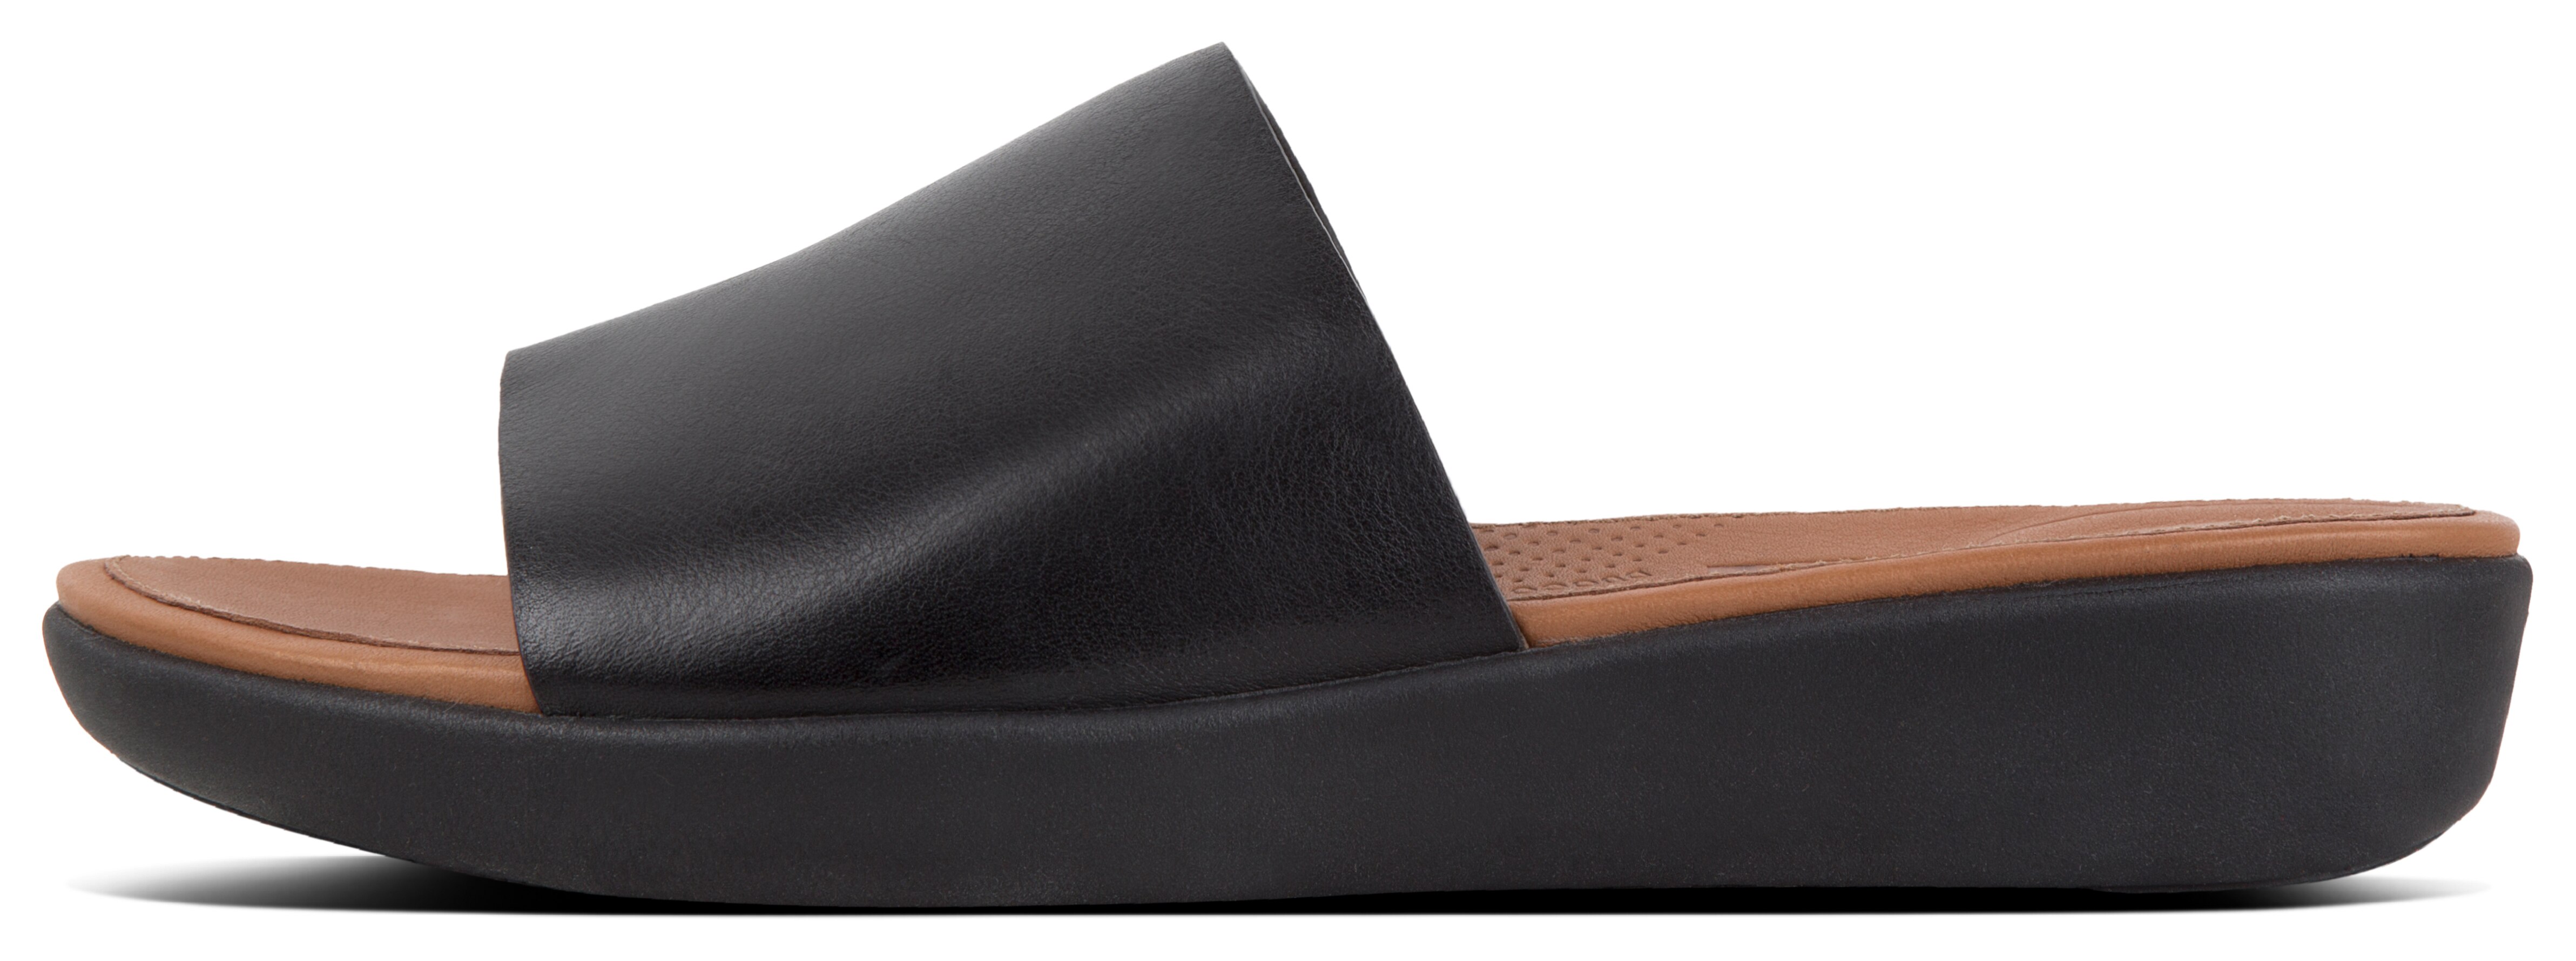 tsc.ca - FitFlop Sola Leather Sandal